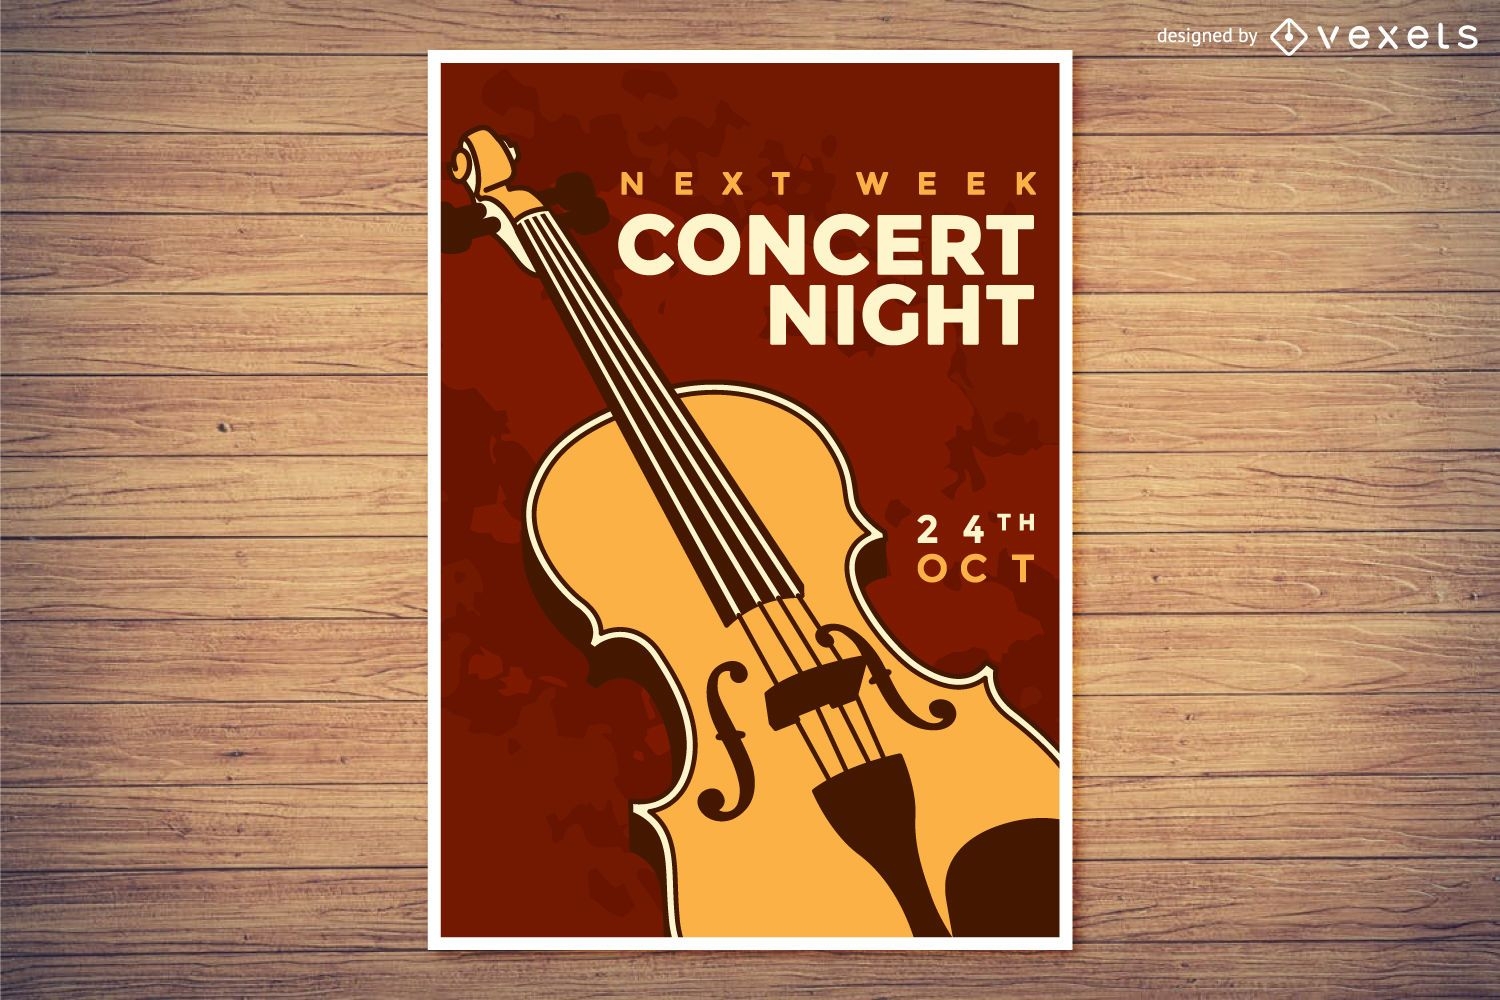 Classical music concert night poster